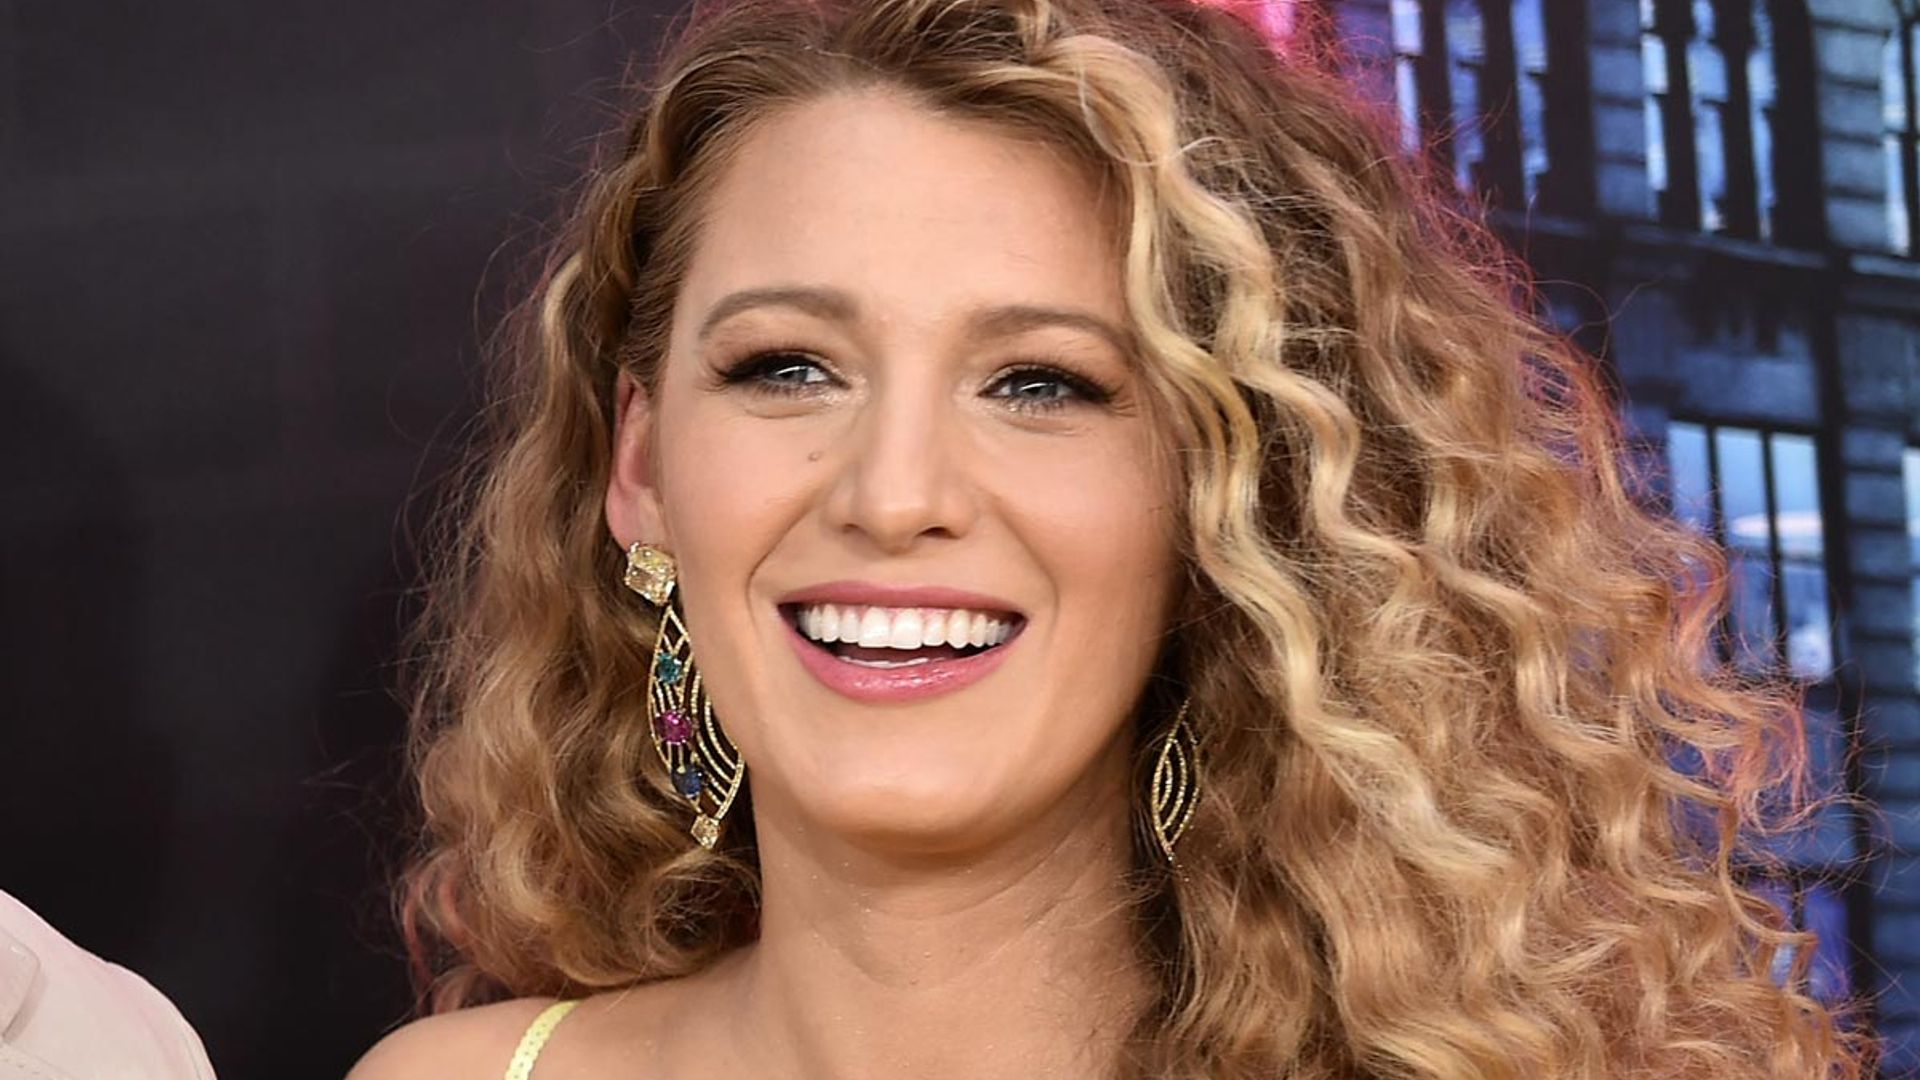 Blake Lively Is Unrecognisable On The Set Of The Rhythm Section in Dublin  